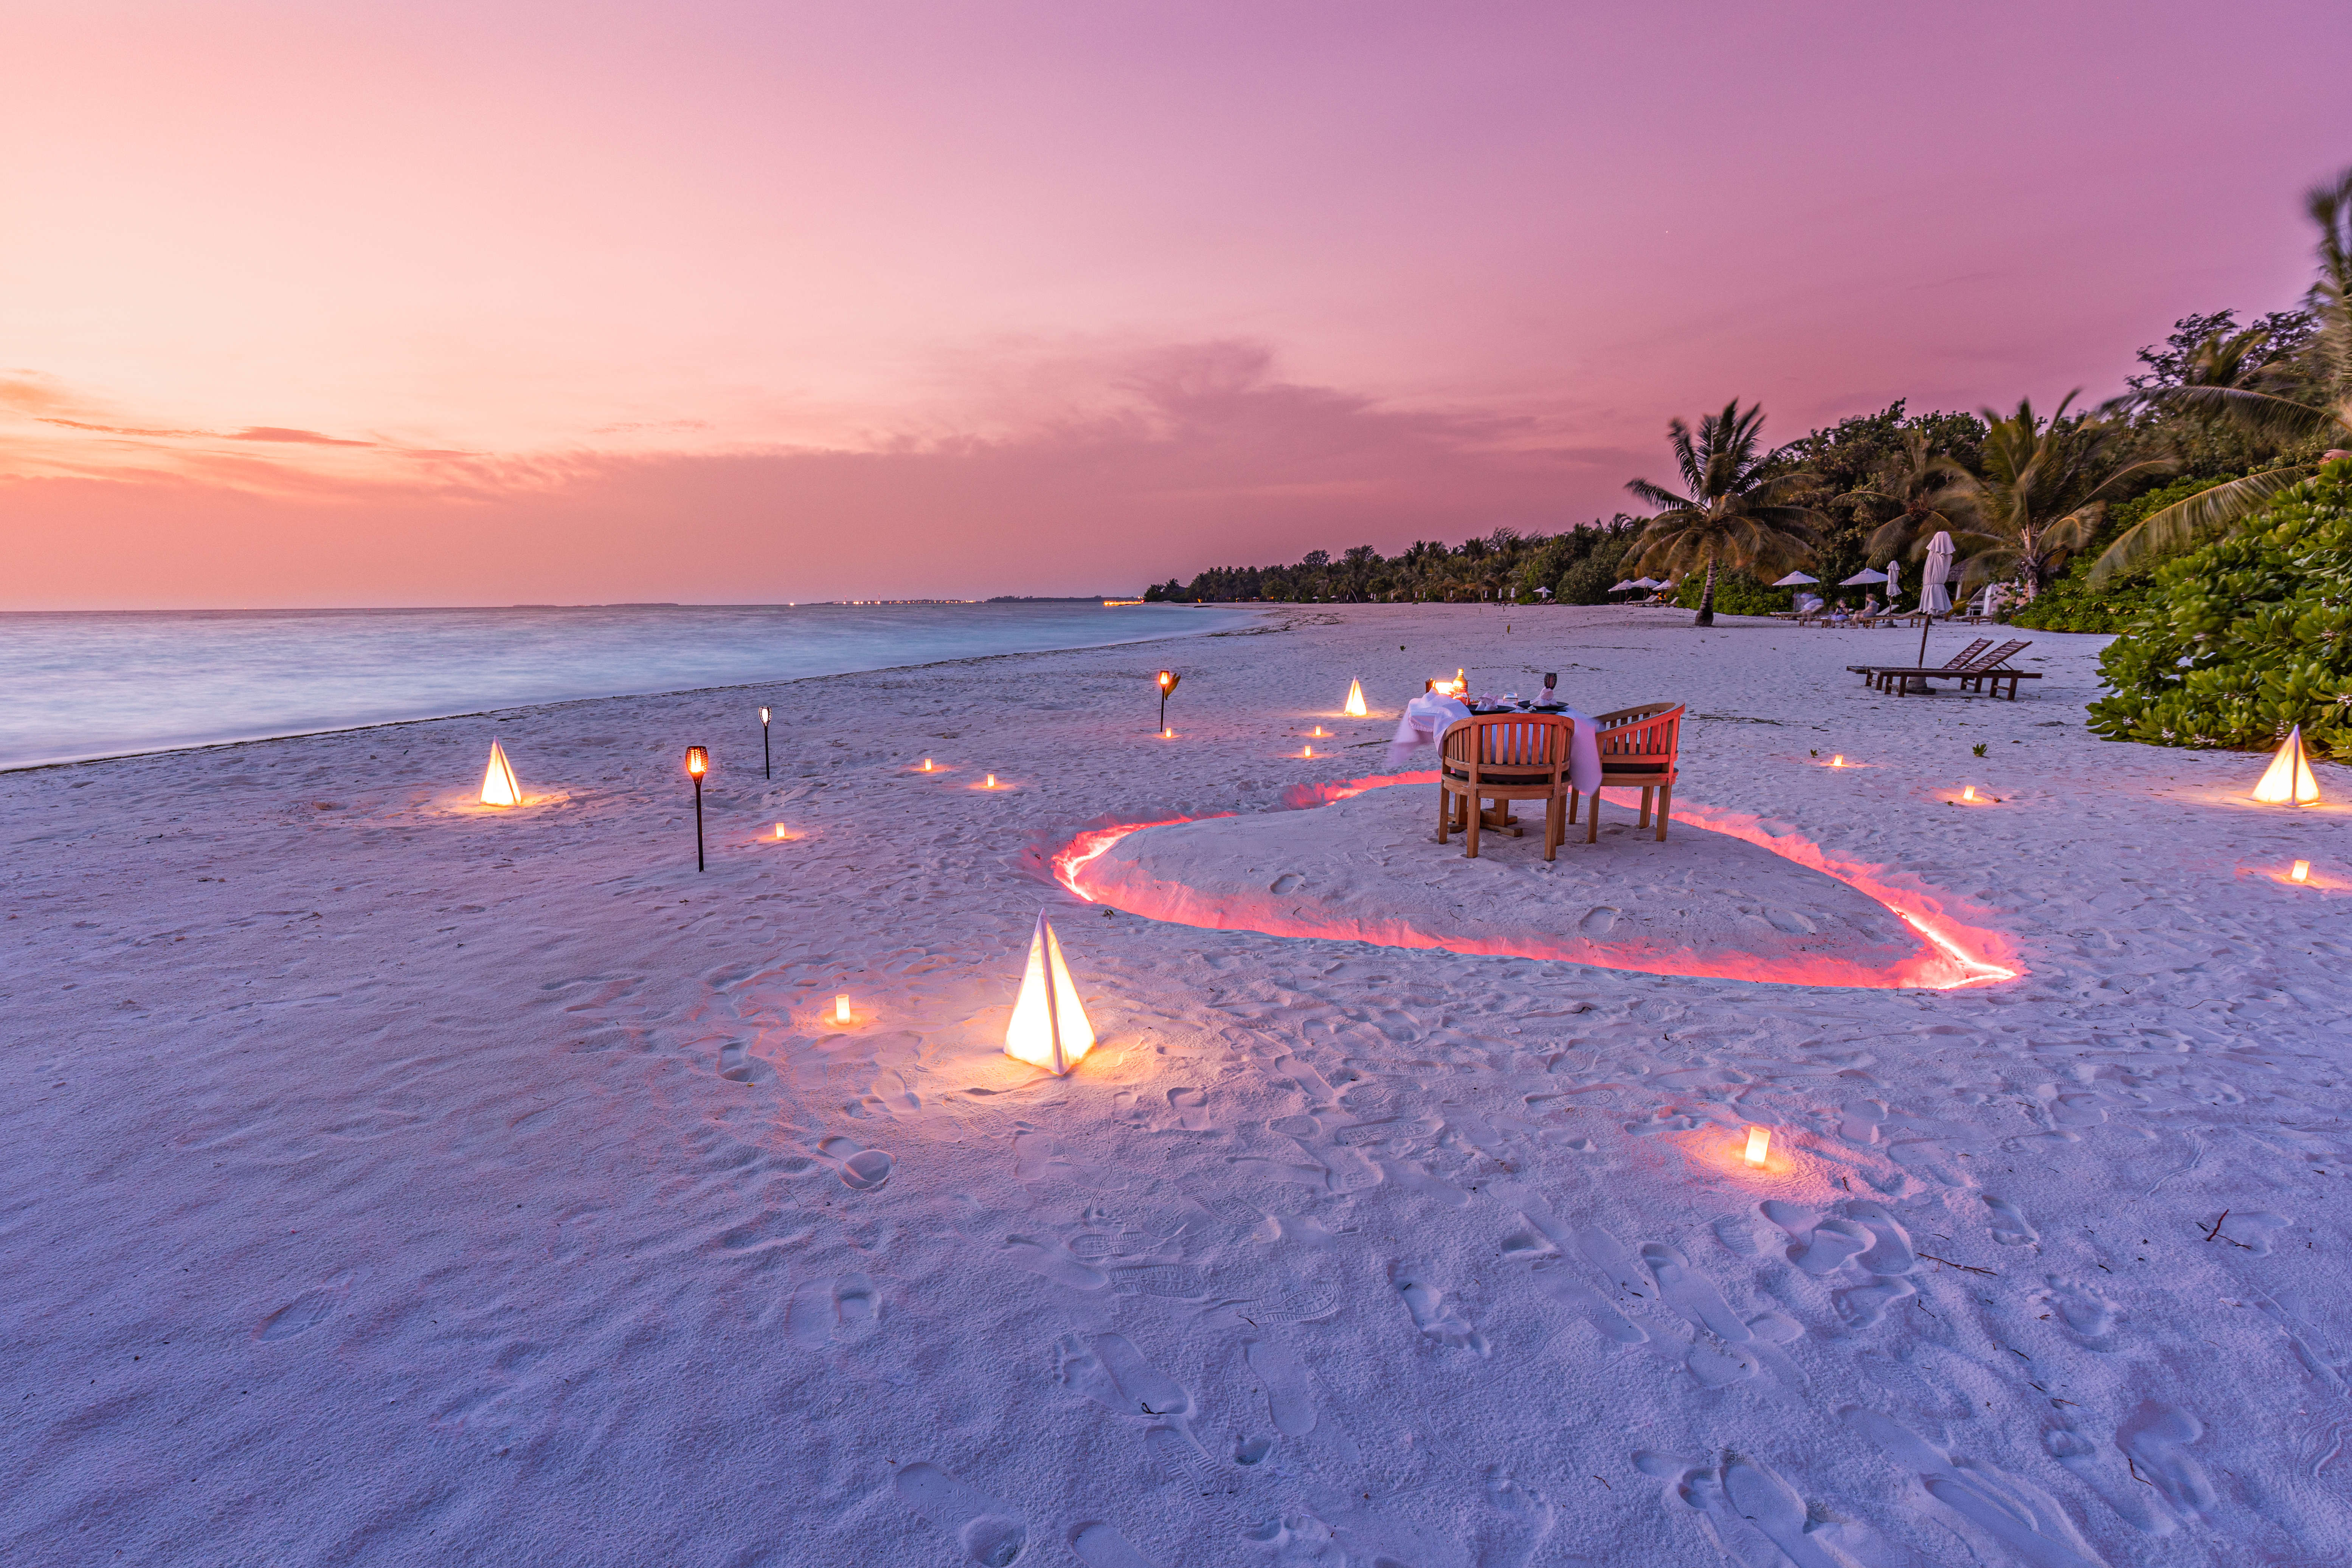 Luxury honeymoon destination, romantic dinner with candles heart on the calm sand beach landscape. Luxury wedding anniversary dinner | Source: Getty Images